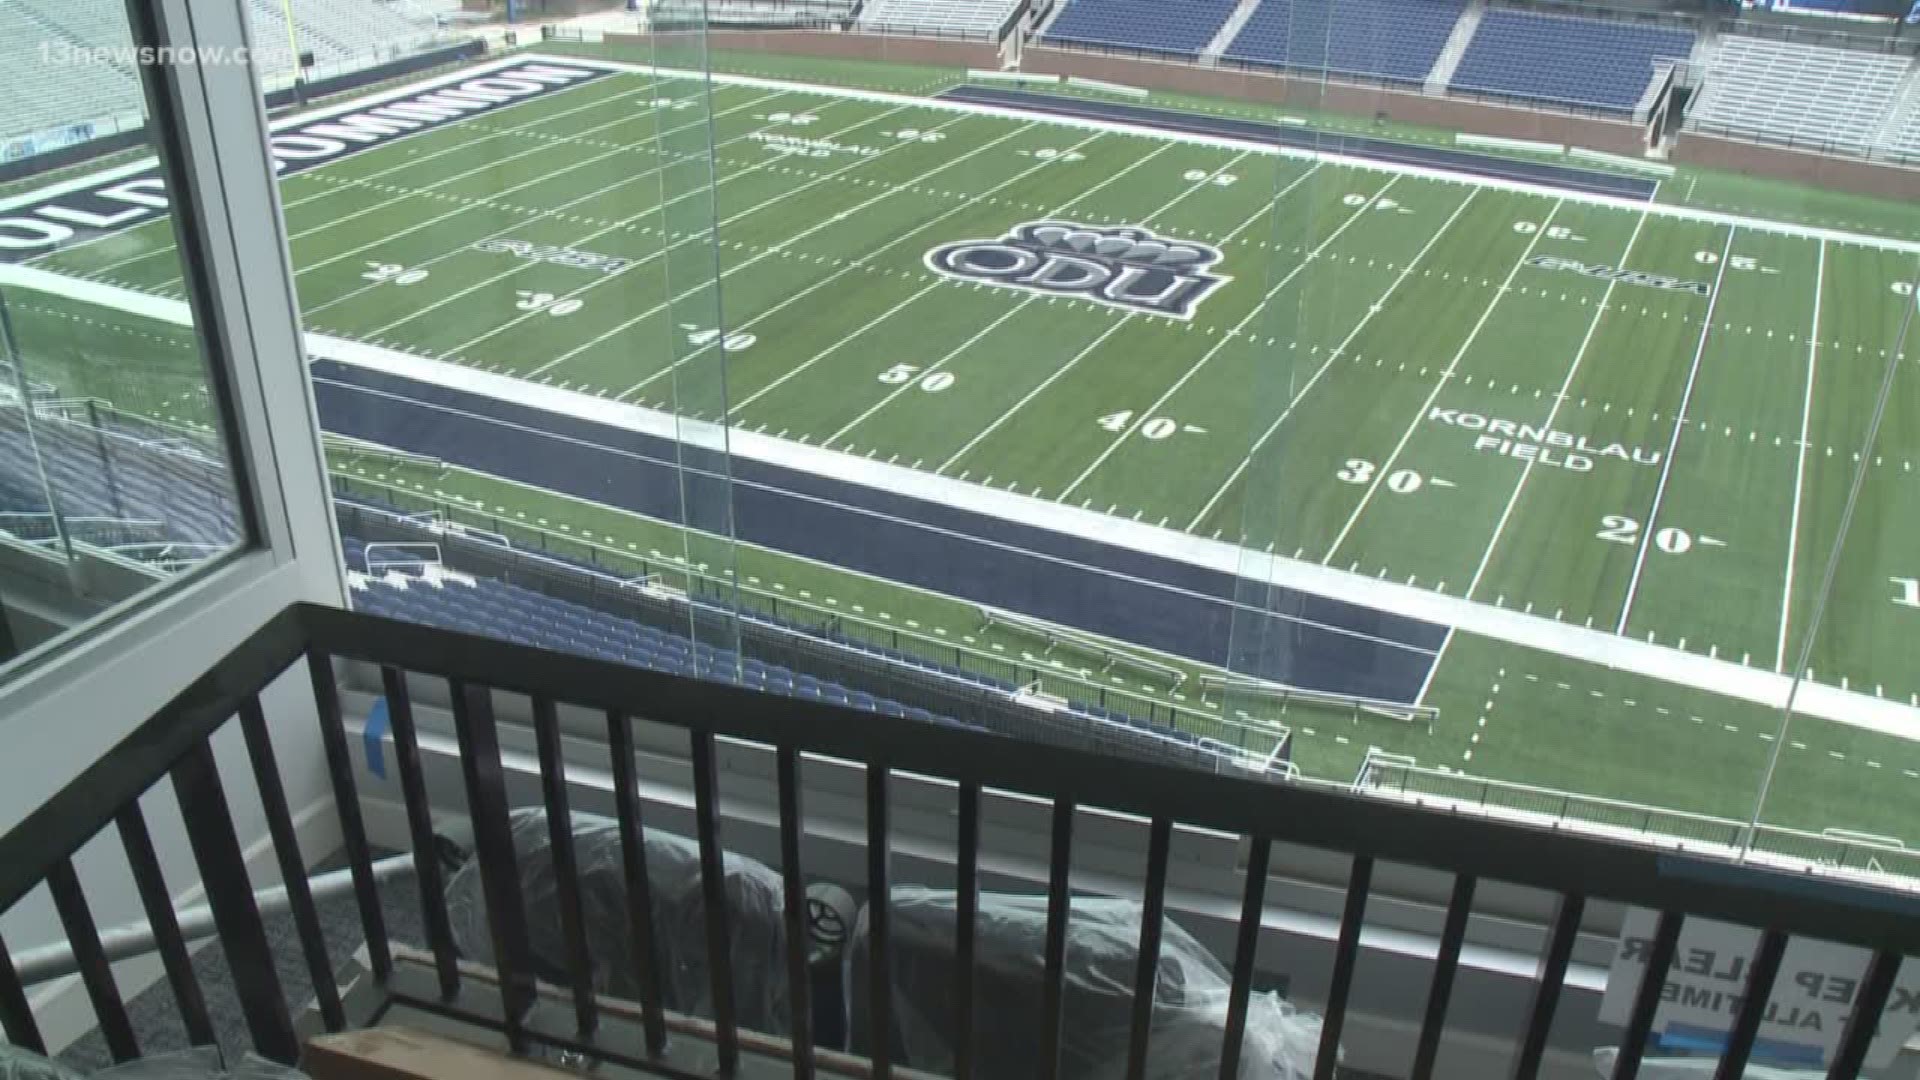 Football season is right around the corner, and construction crews are putting the final touches on Old Dominion University’s stadium. Construction teams are still working, painting and installing fixtures, but Associate AD Greg Smith said although there’s still work to do, the stadium will be ready to kick off the season on August 31st.